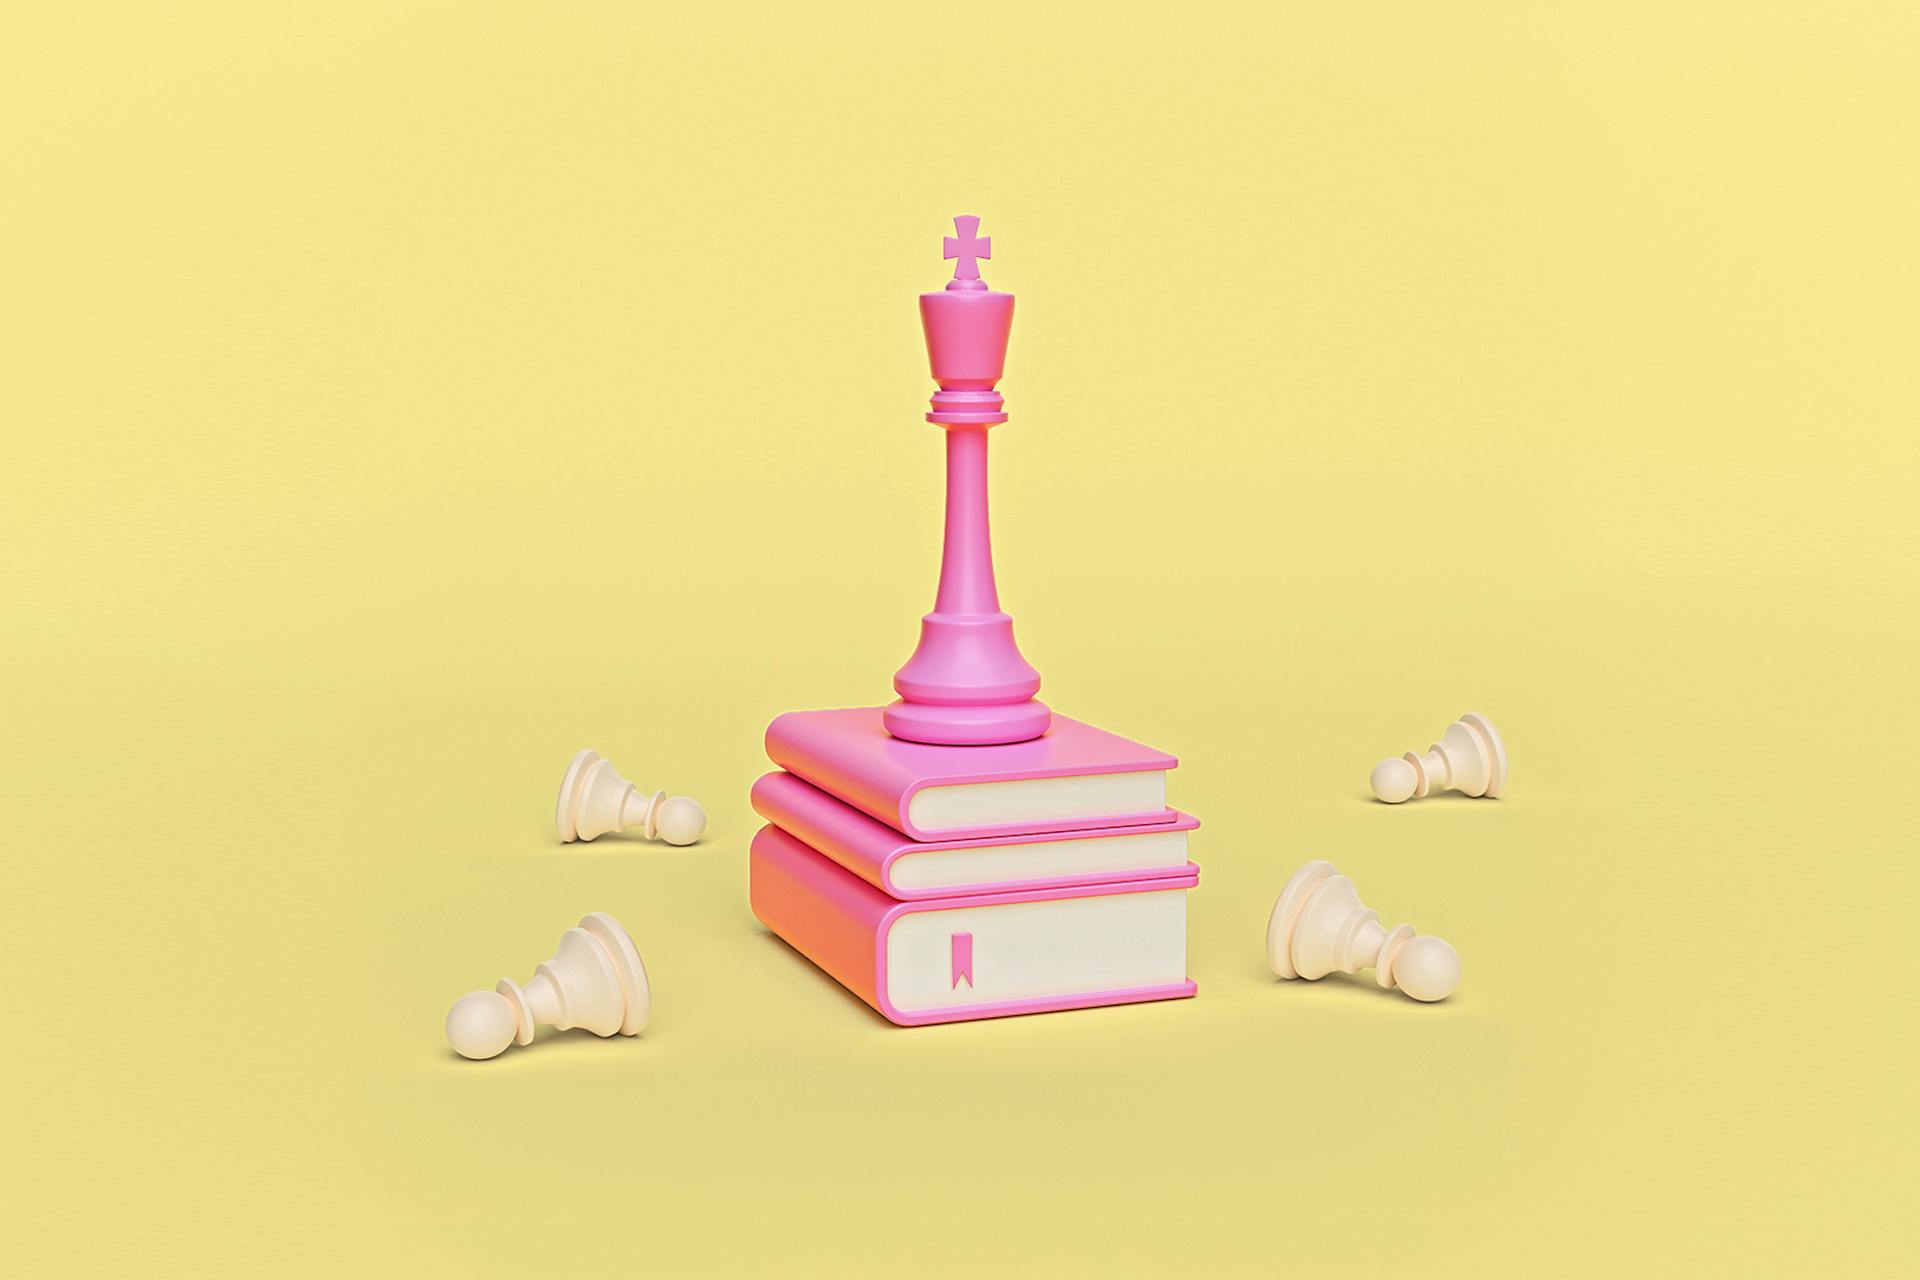 This blog is a guide on how to come out on top when it comes to product branding, so this image of a pink chess piece sat atop a stack of books with fallen pawn chess pieces around the books demonstrates the winning strategy one can gain from reading this post.